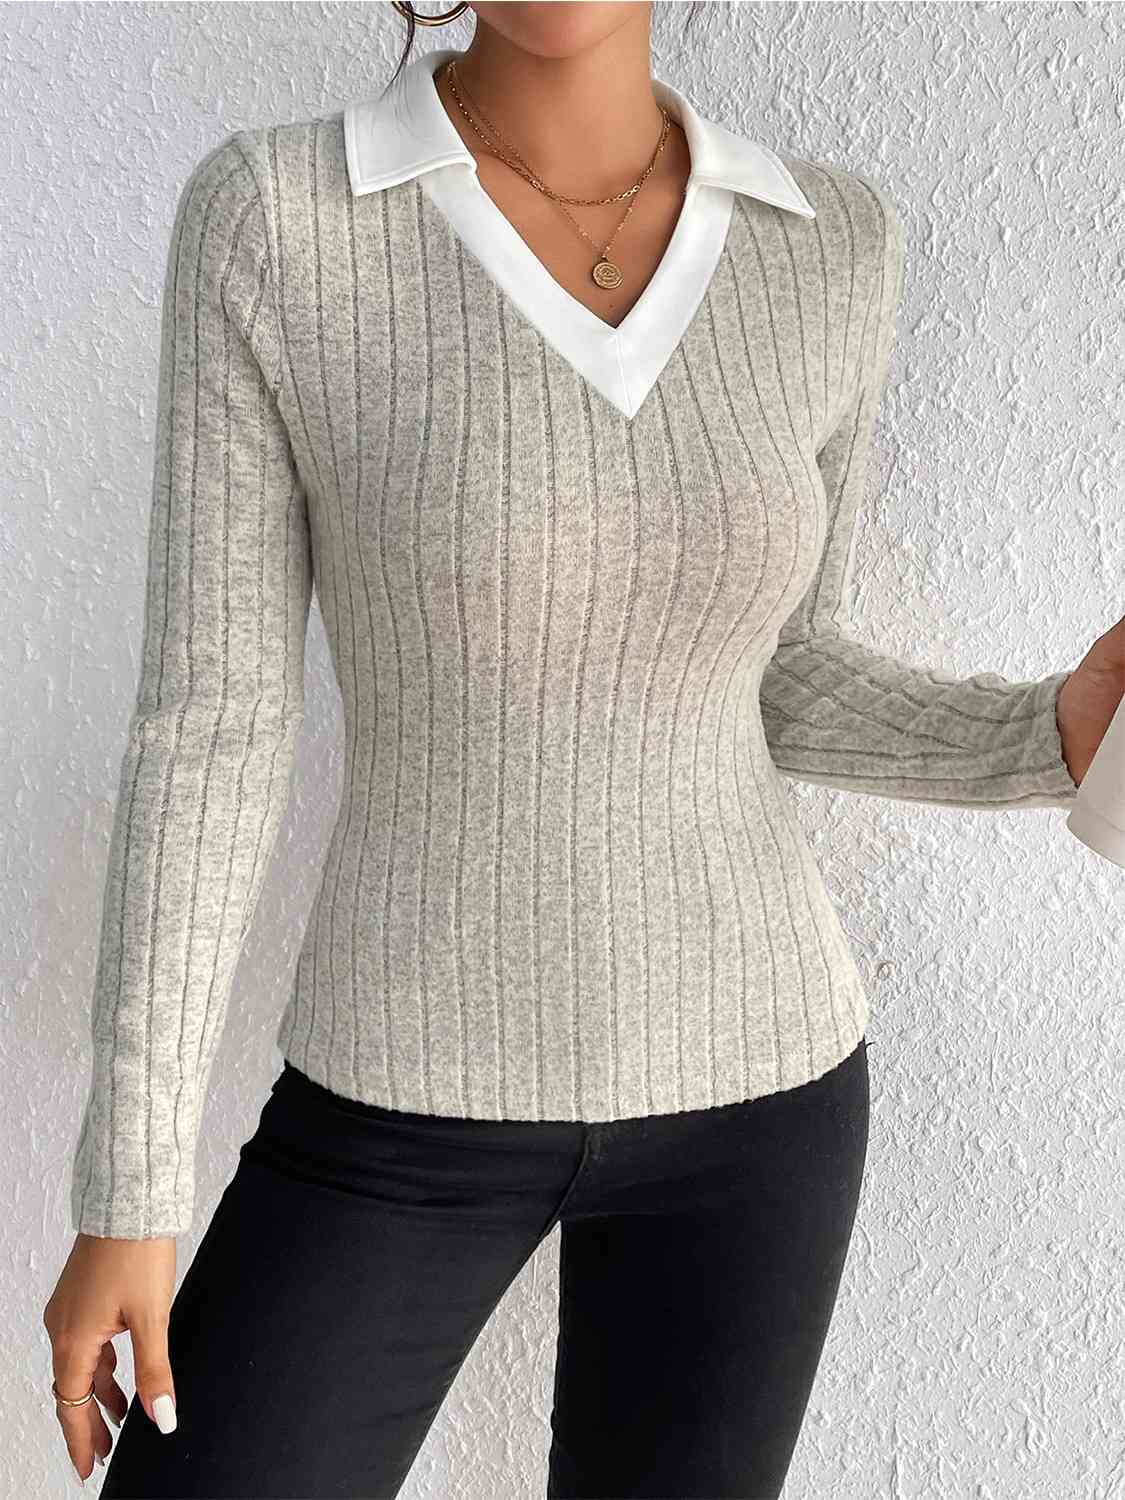 Ribbed Johnny Collar Long Sleeve Blouse - Women’s Clothing & Accessories - Shirts & Tops - 4 - 2024